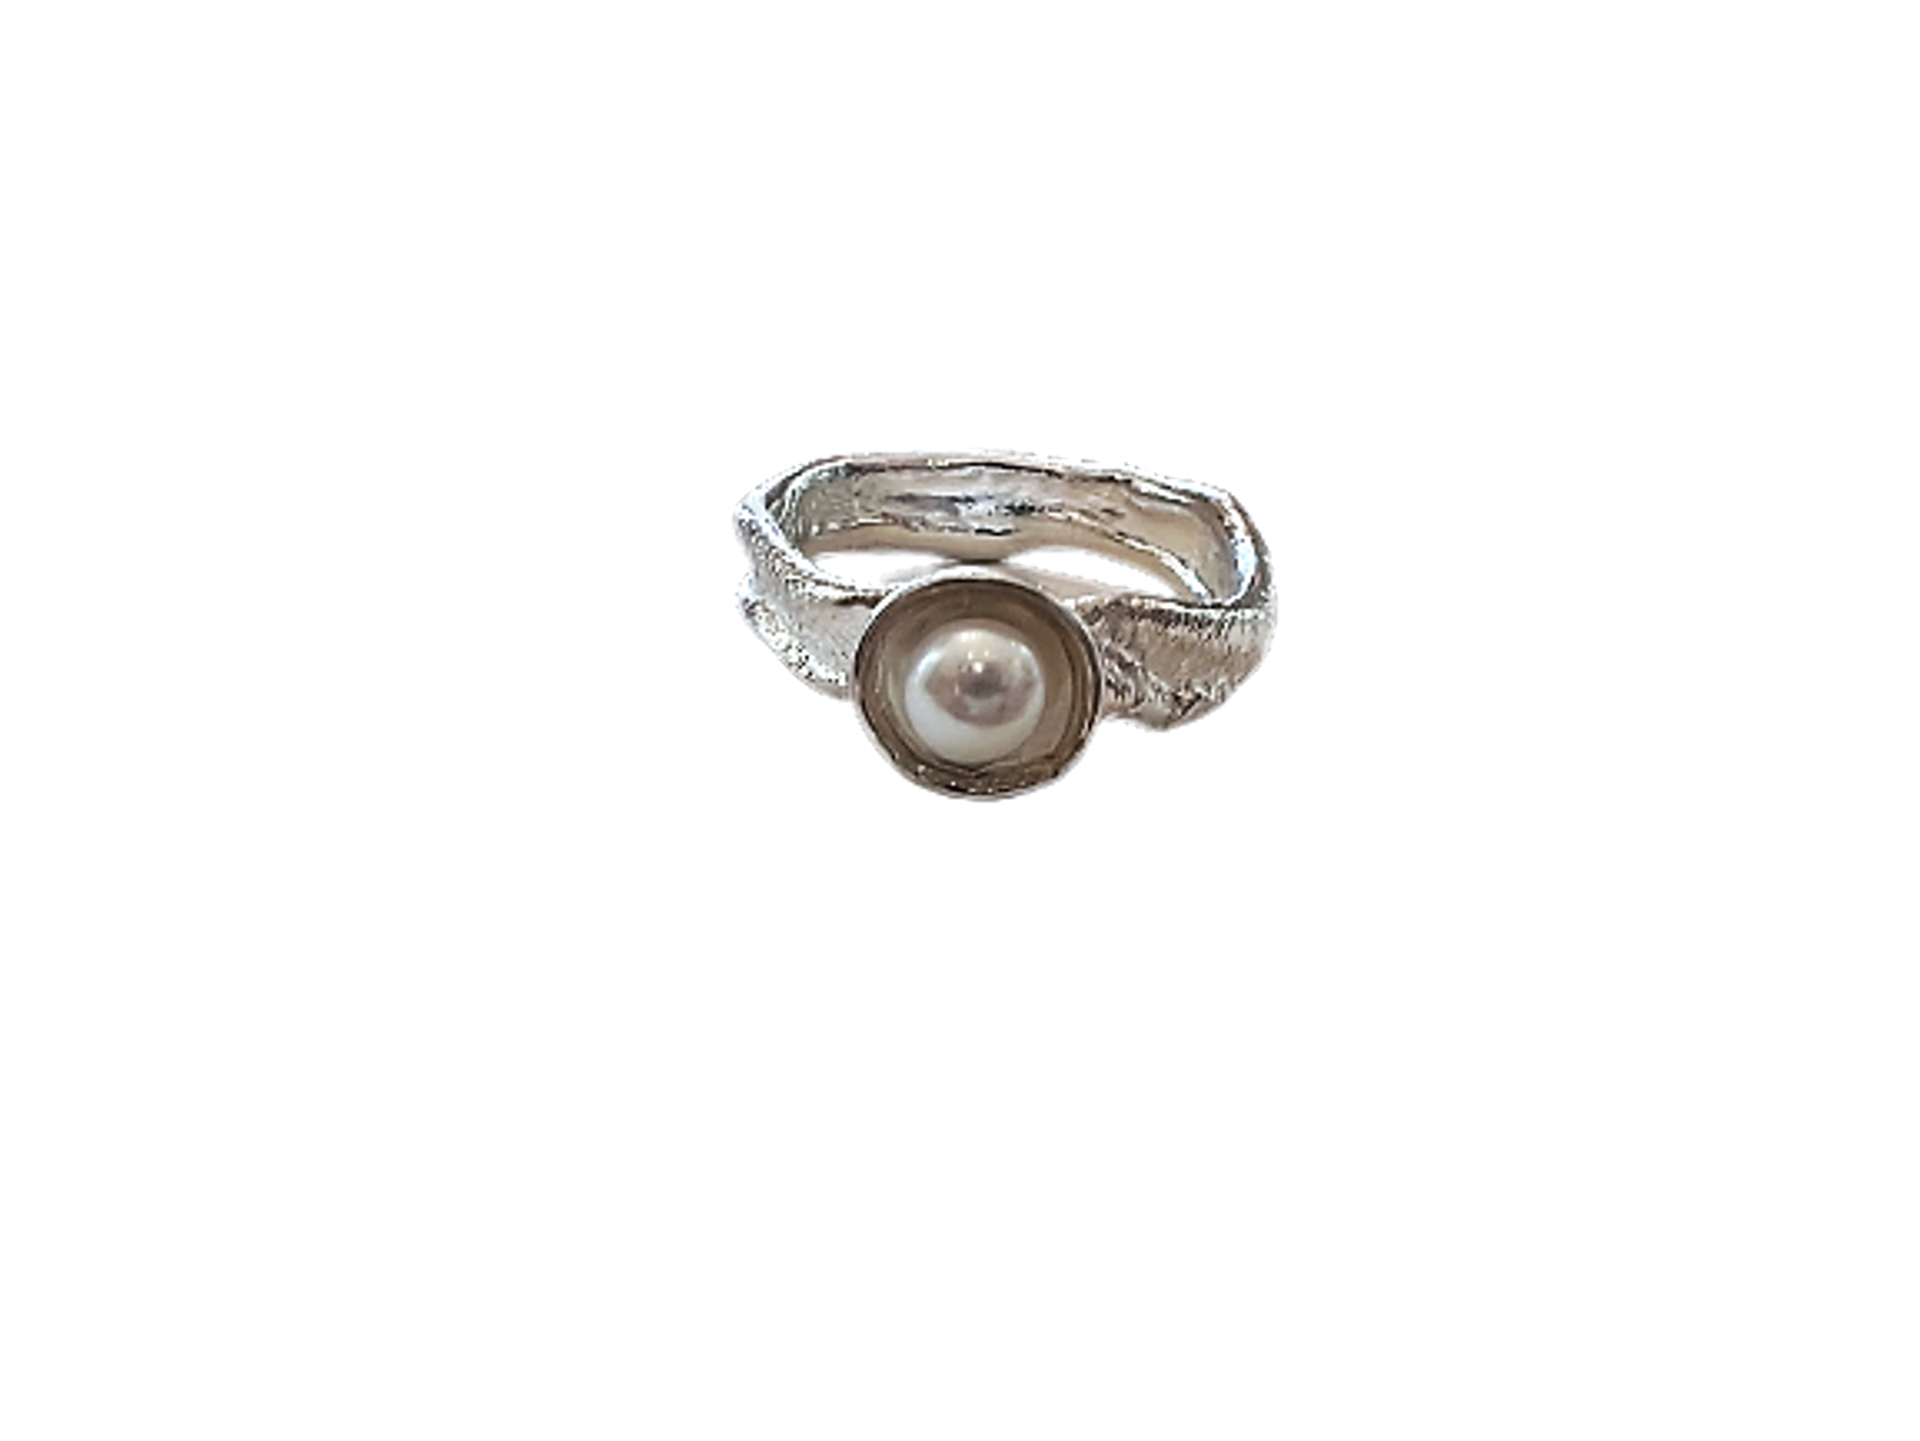 Ripple Ring - Pearl (Small) by Kristen Baird